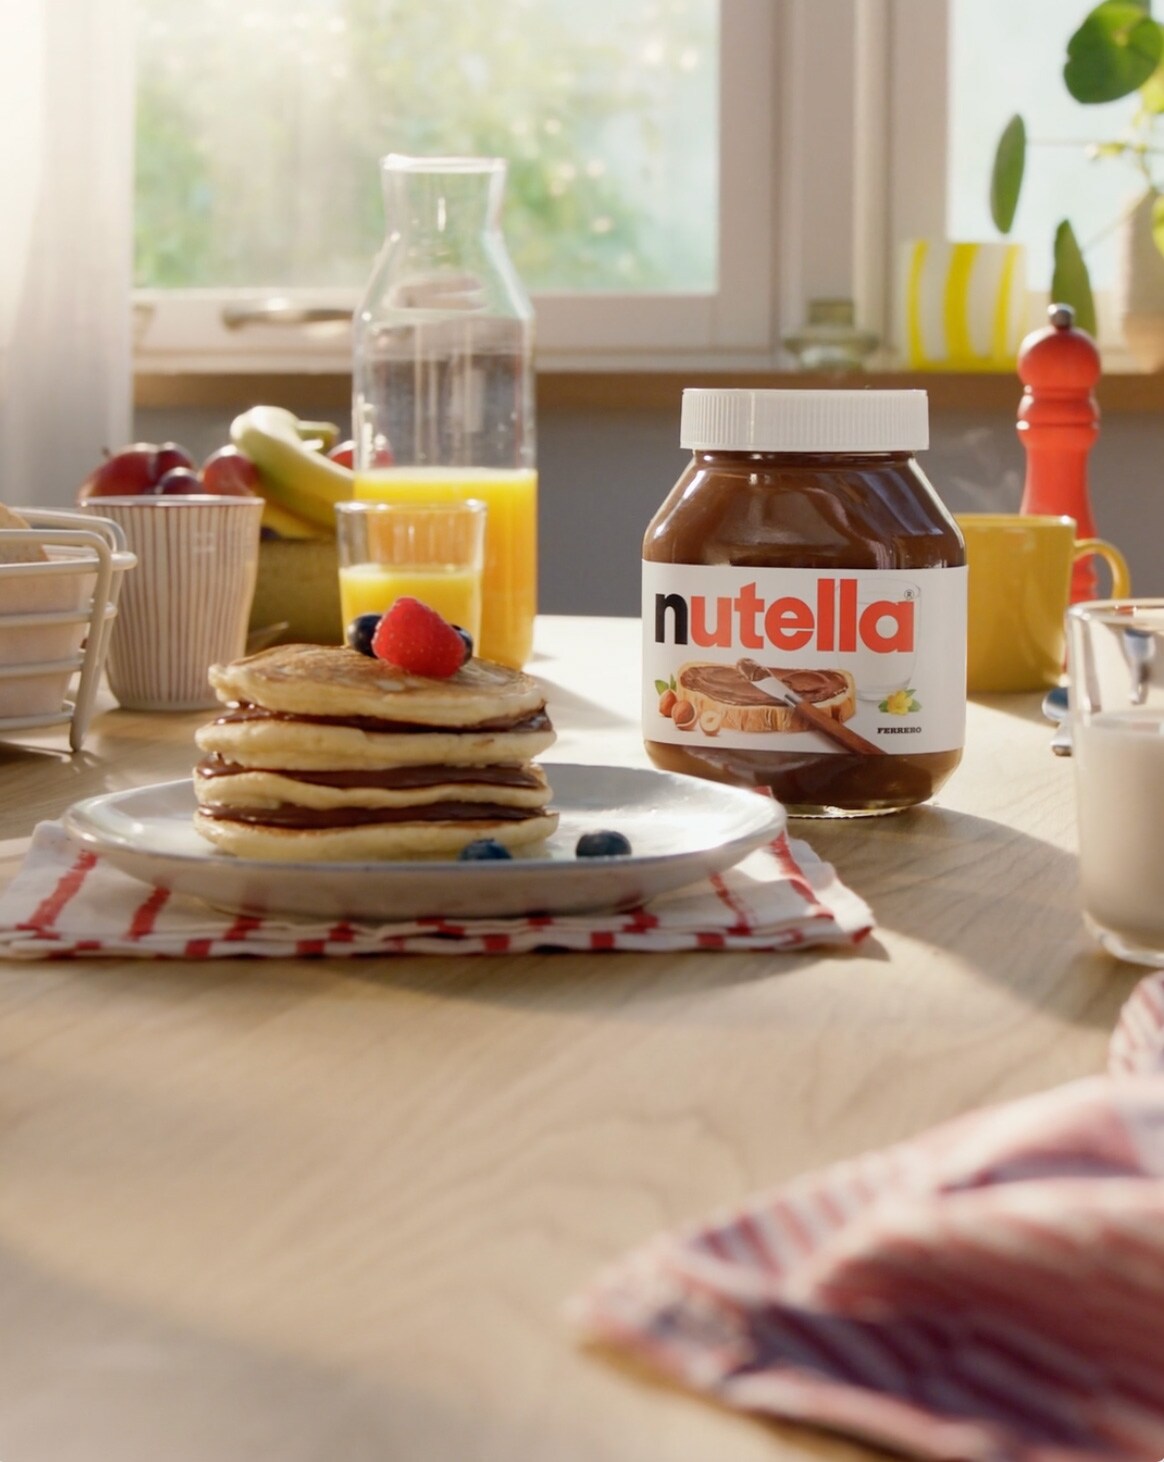 Nutella filled pancakes - Fat Girl Hedonist